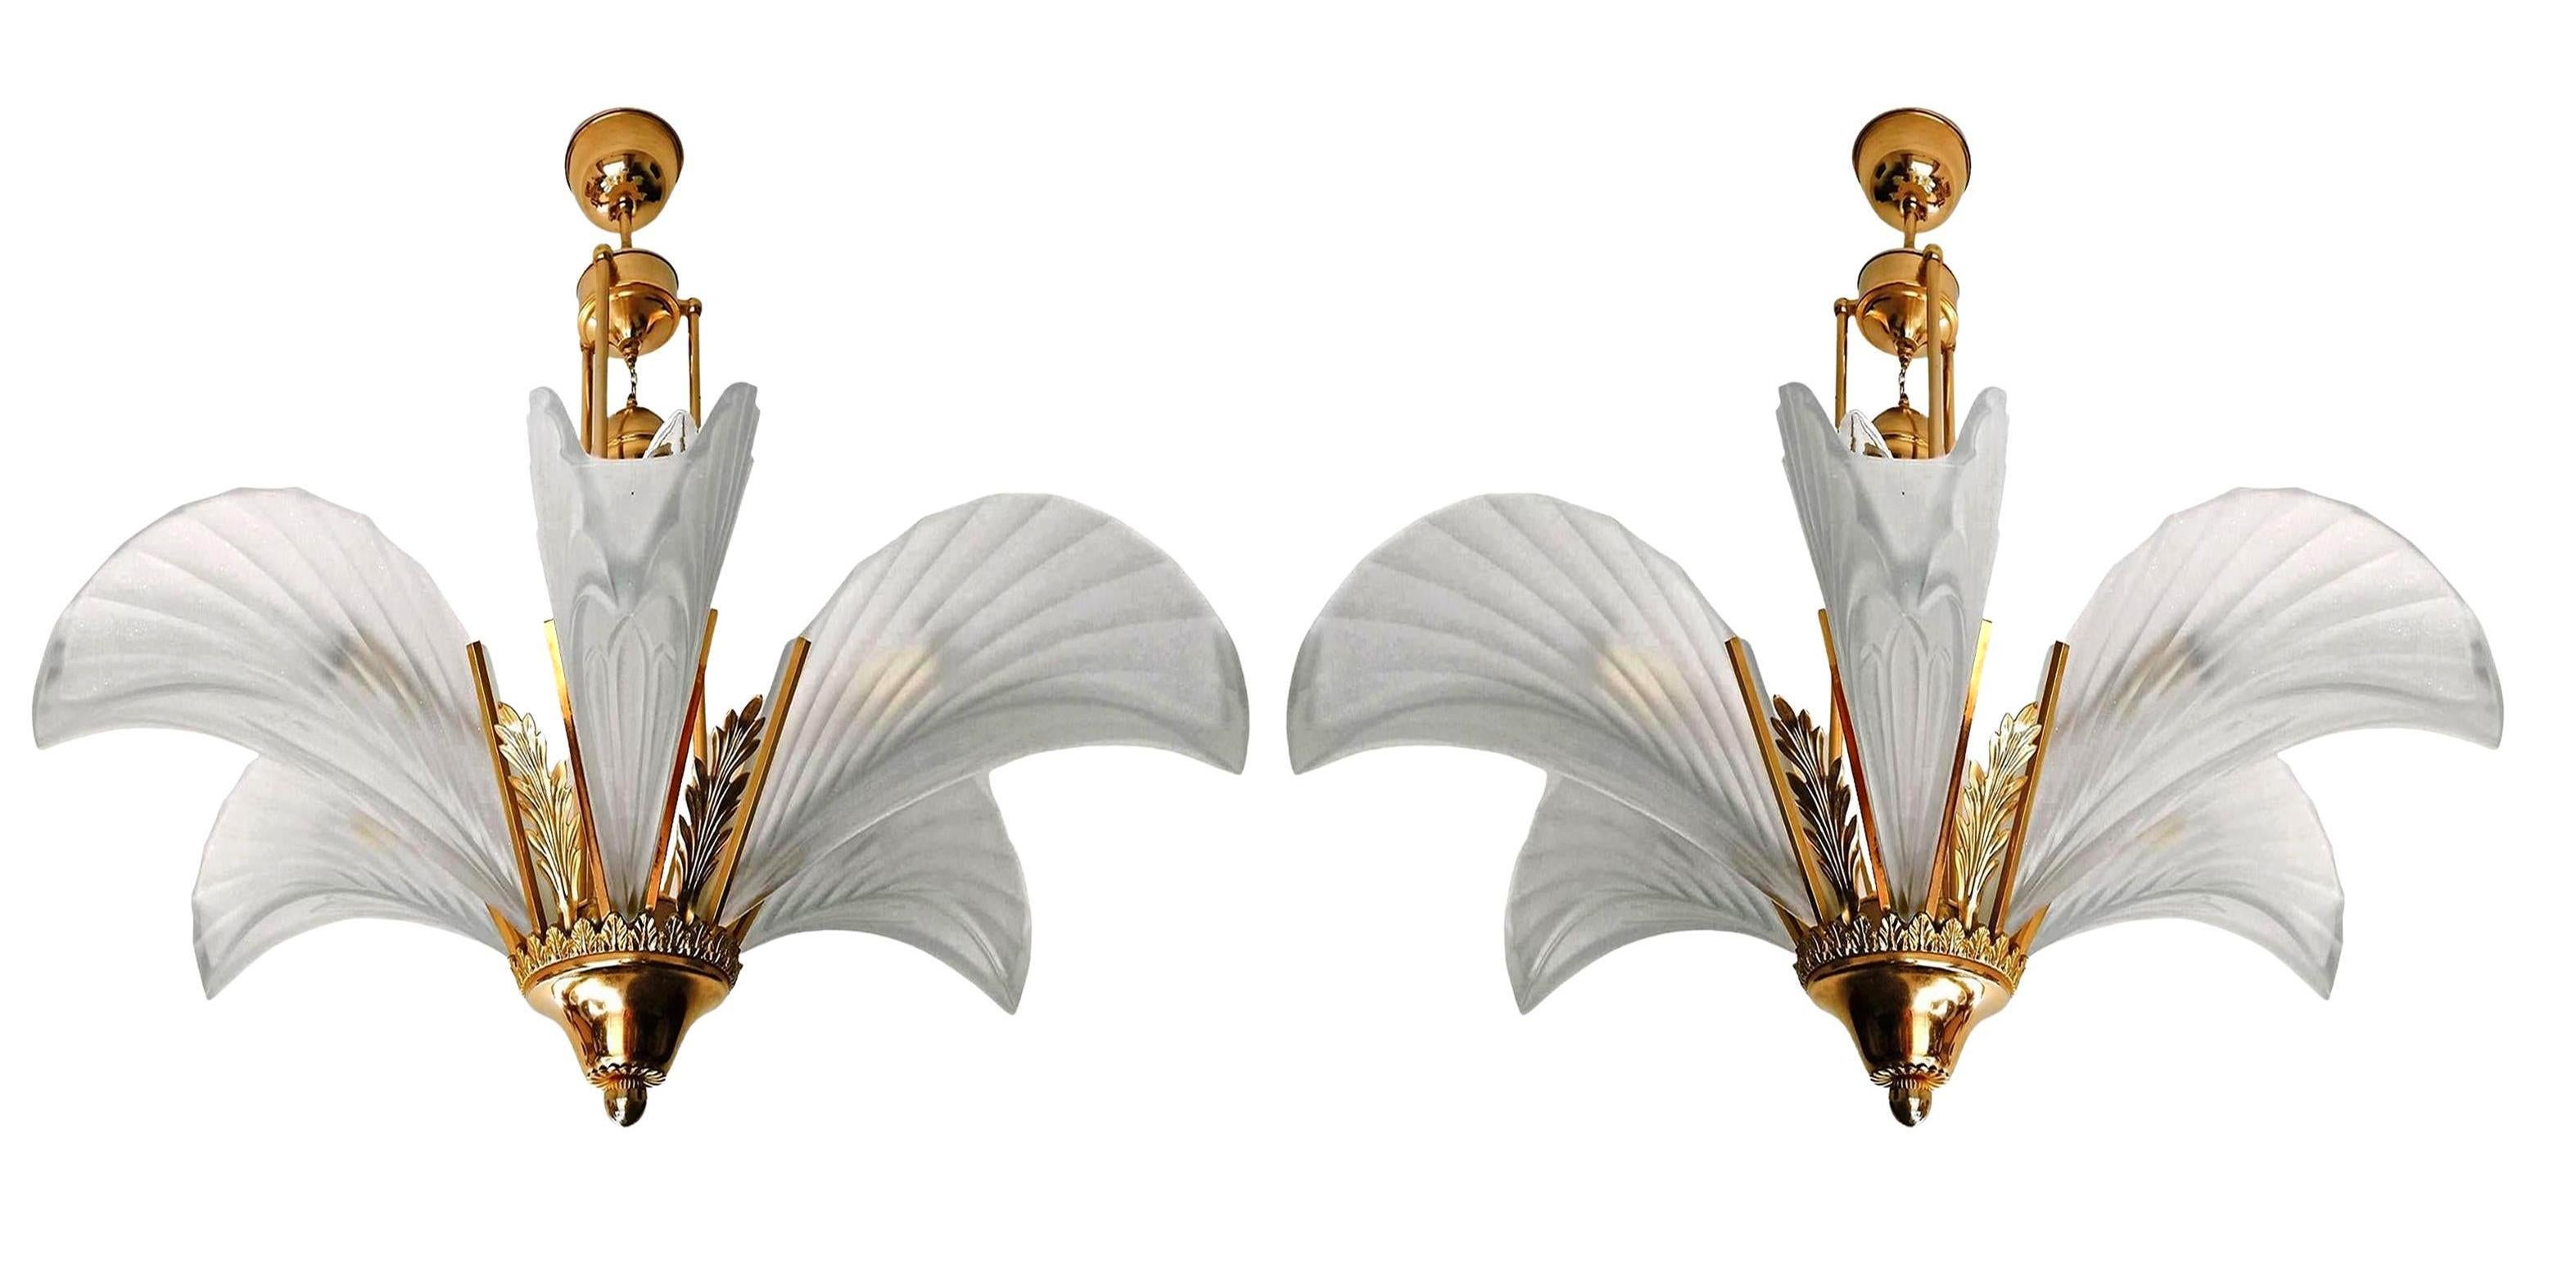 French Art Deco frosted glass leaves lamp shades gilt chandelier. A pair available. Price Per Unit.
Dimentions:
Diameter 28.5 in/ 72 cm
Height 25.2 in/ 64 cm
Weight: 8Kg / 18 lb
6 light bulbs E14 Good working condition
Assembly required.
    